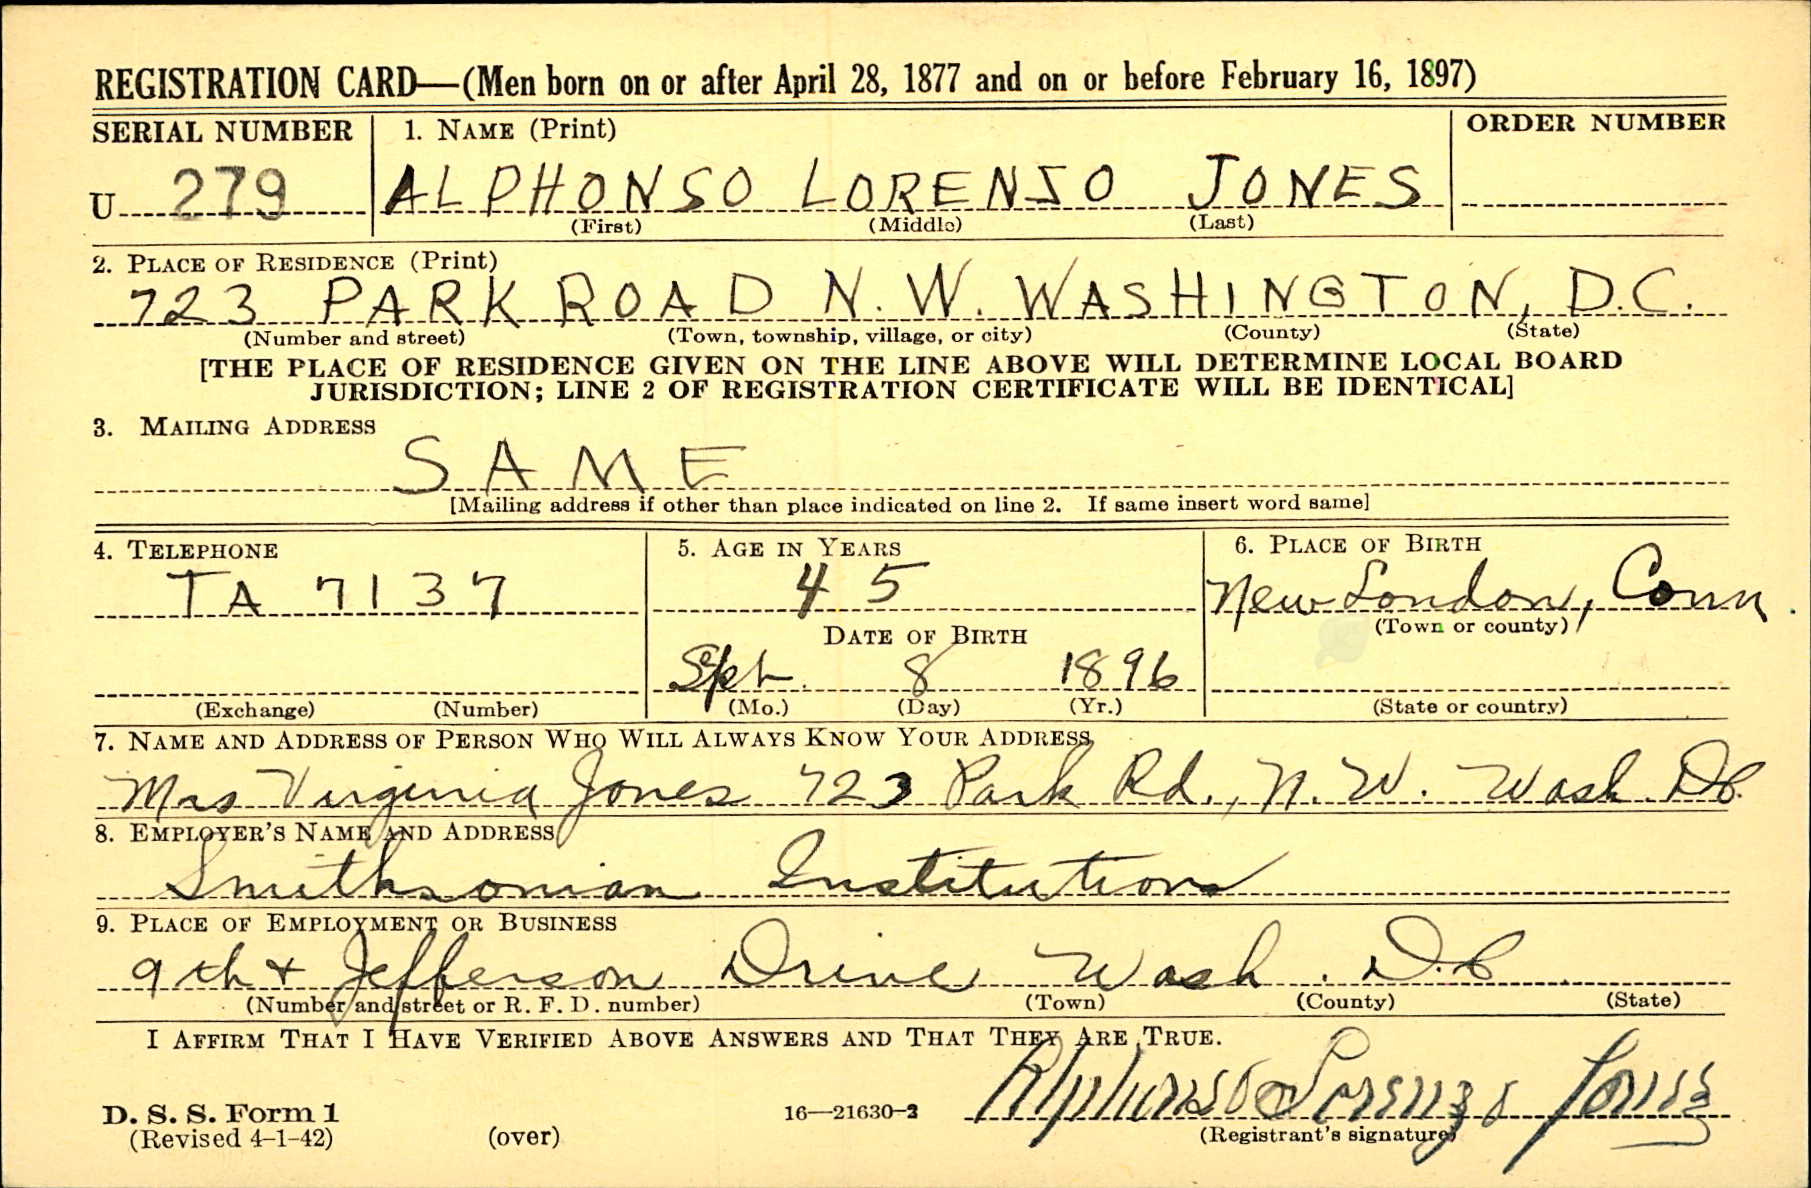 Jones' draft card lists his address as 723 Park Road NW Washington DC. His birth date is Sept. 8 189